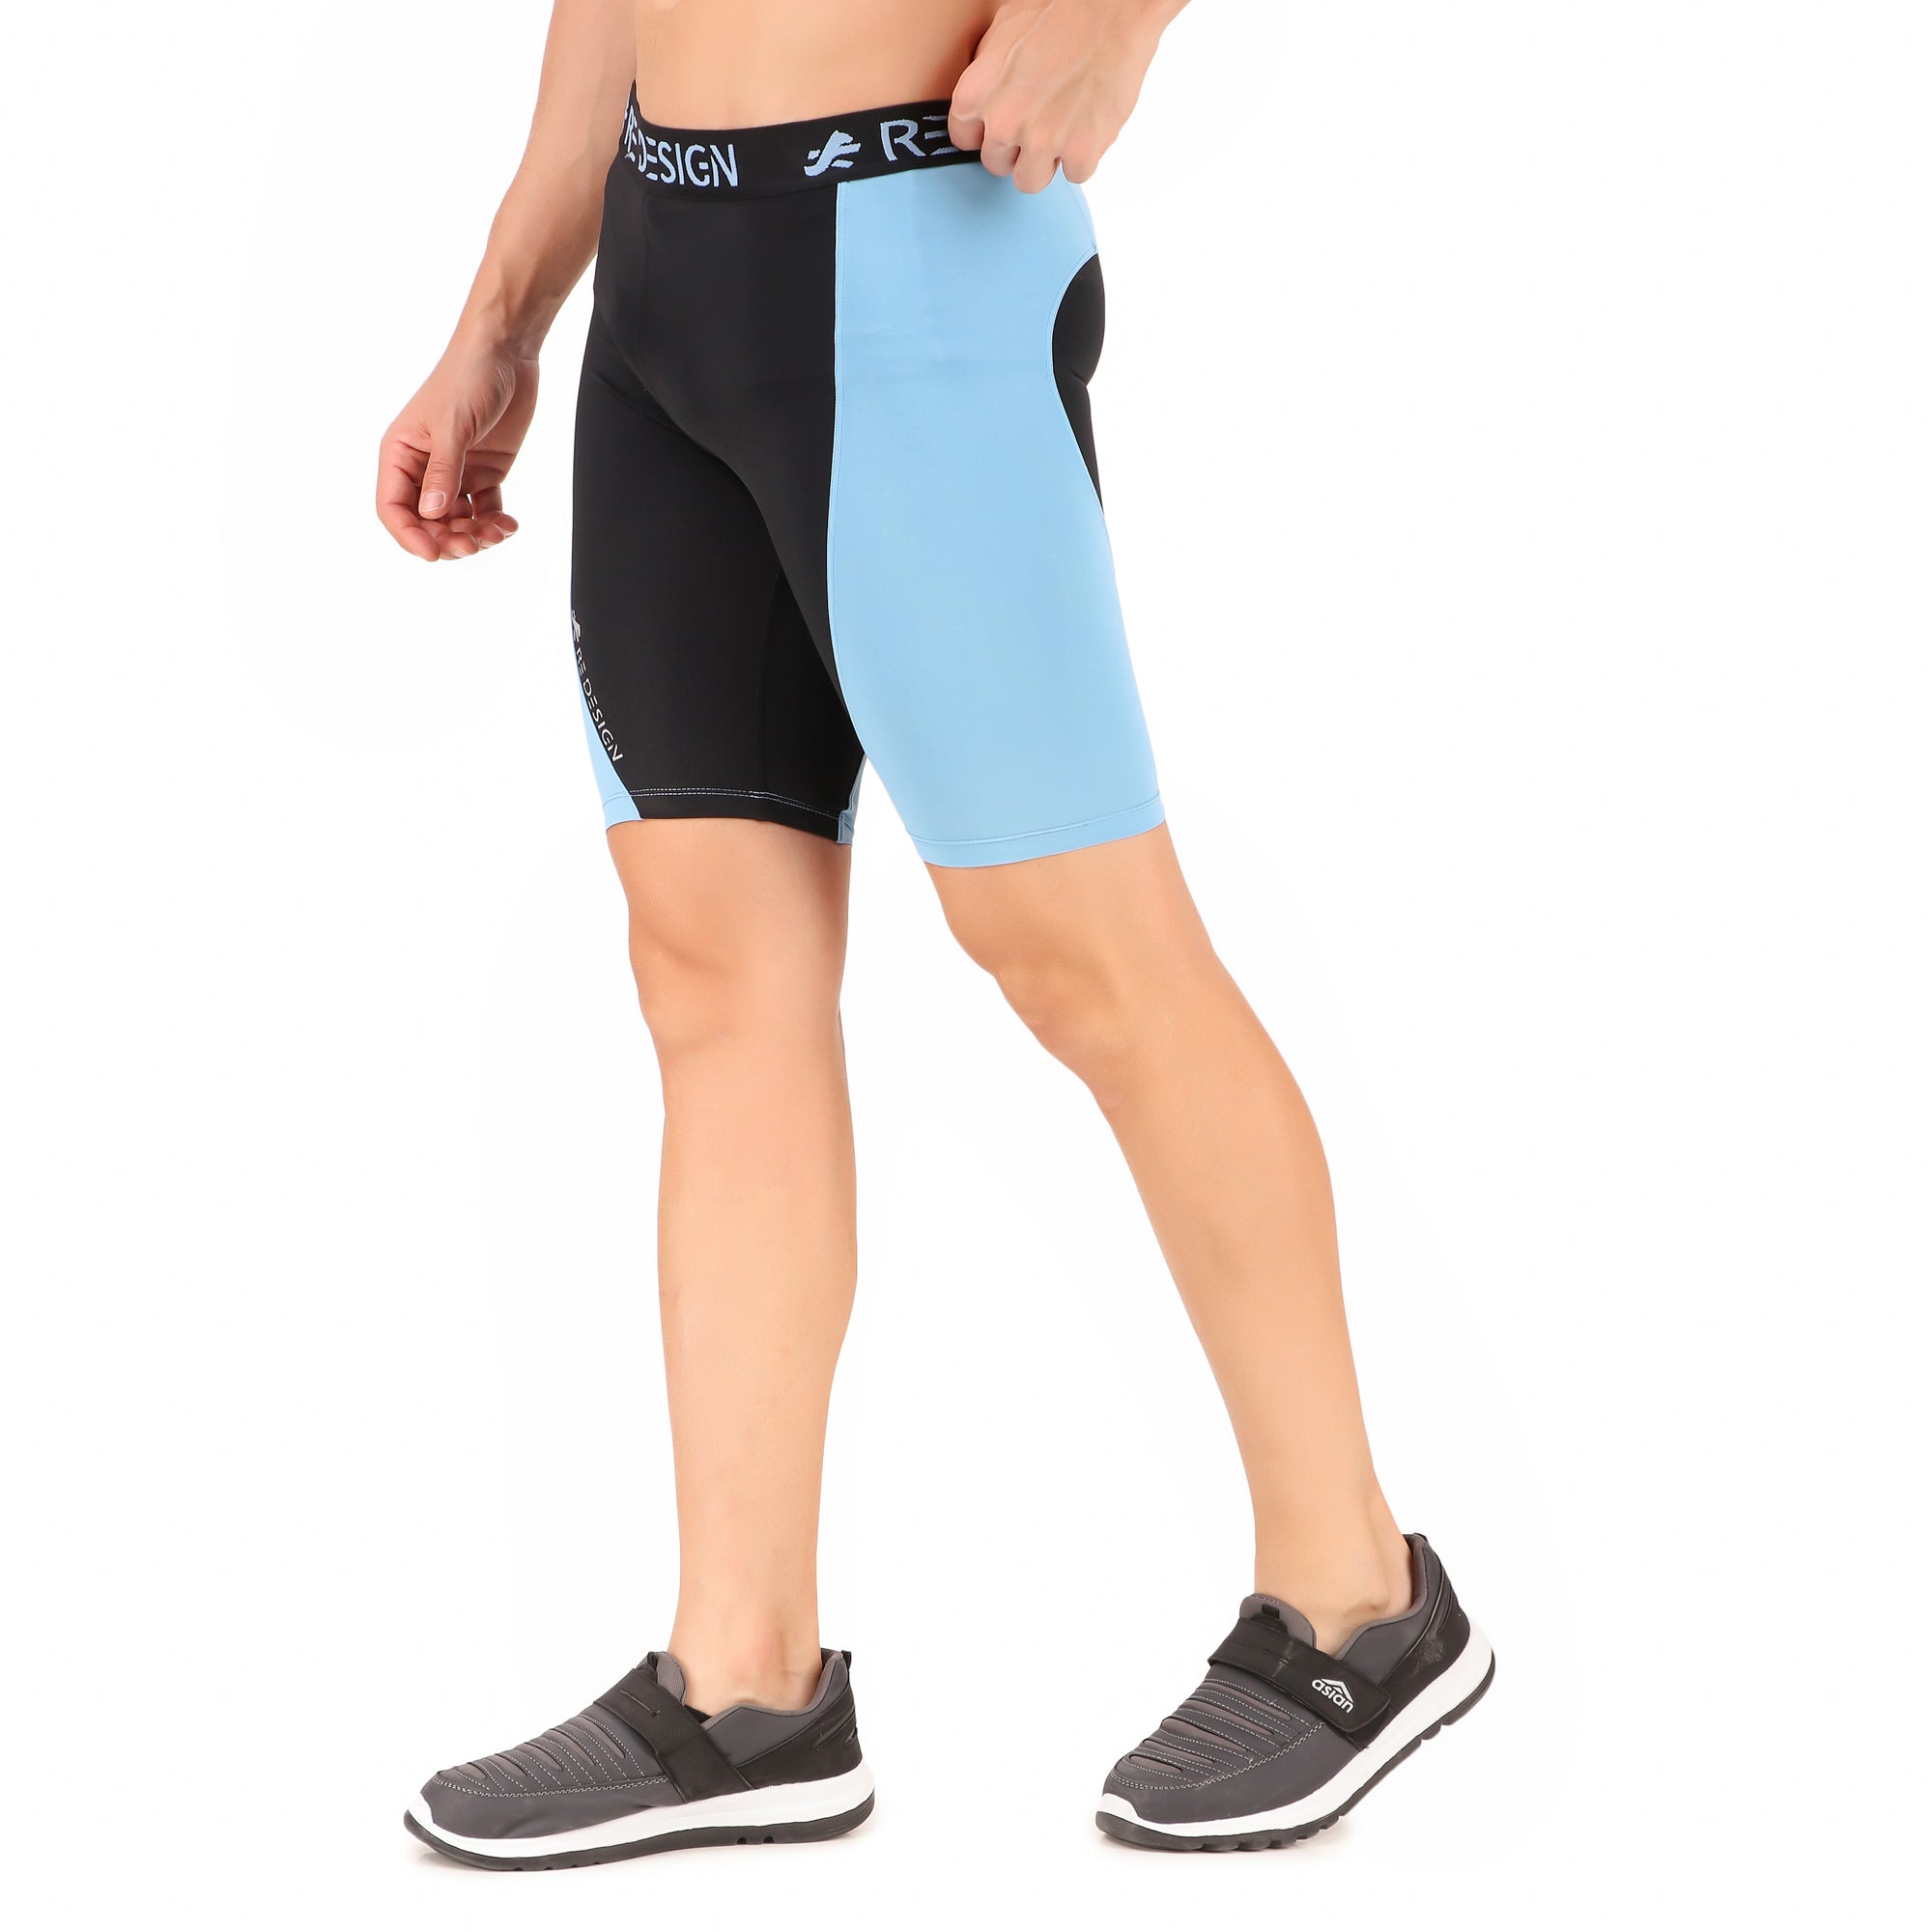 Nylon Compression Shorts and Half Tights For Men (Sky Blue)